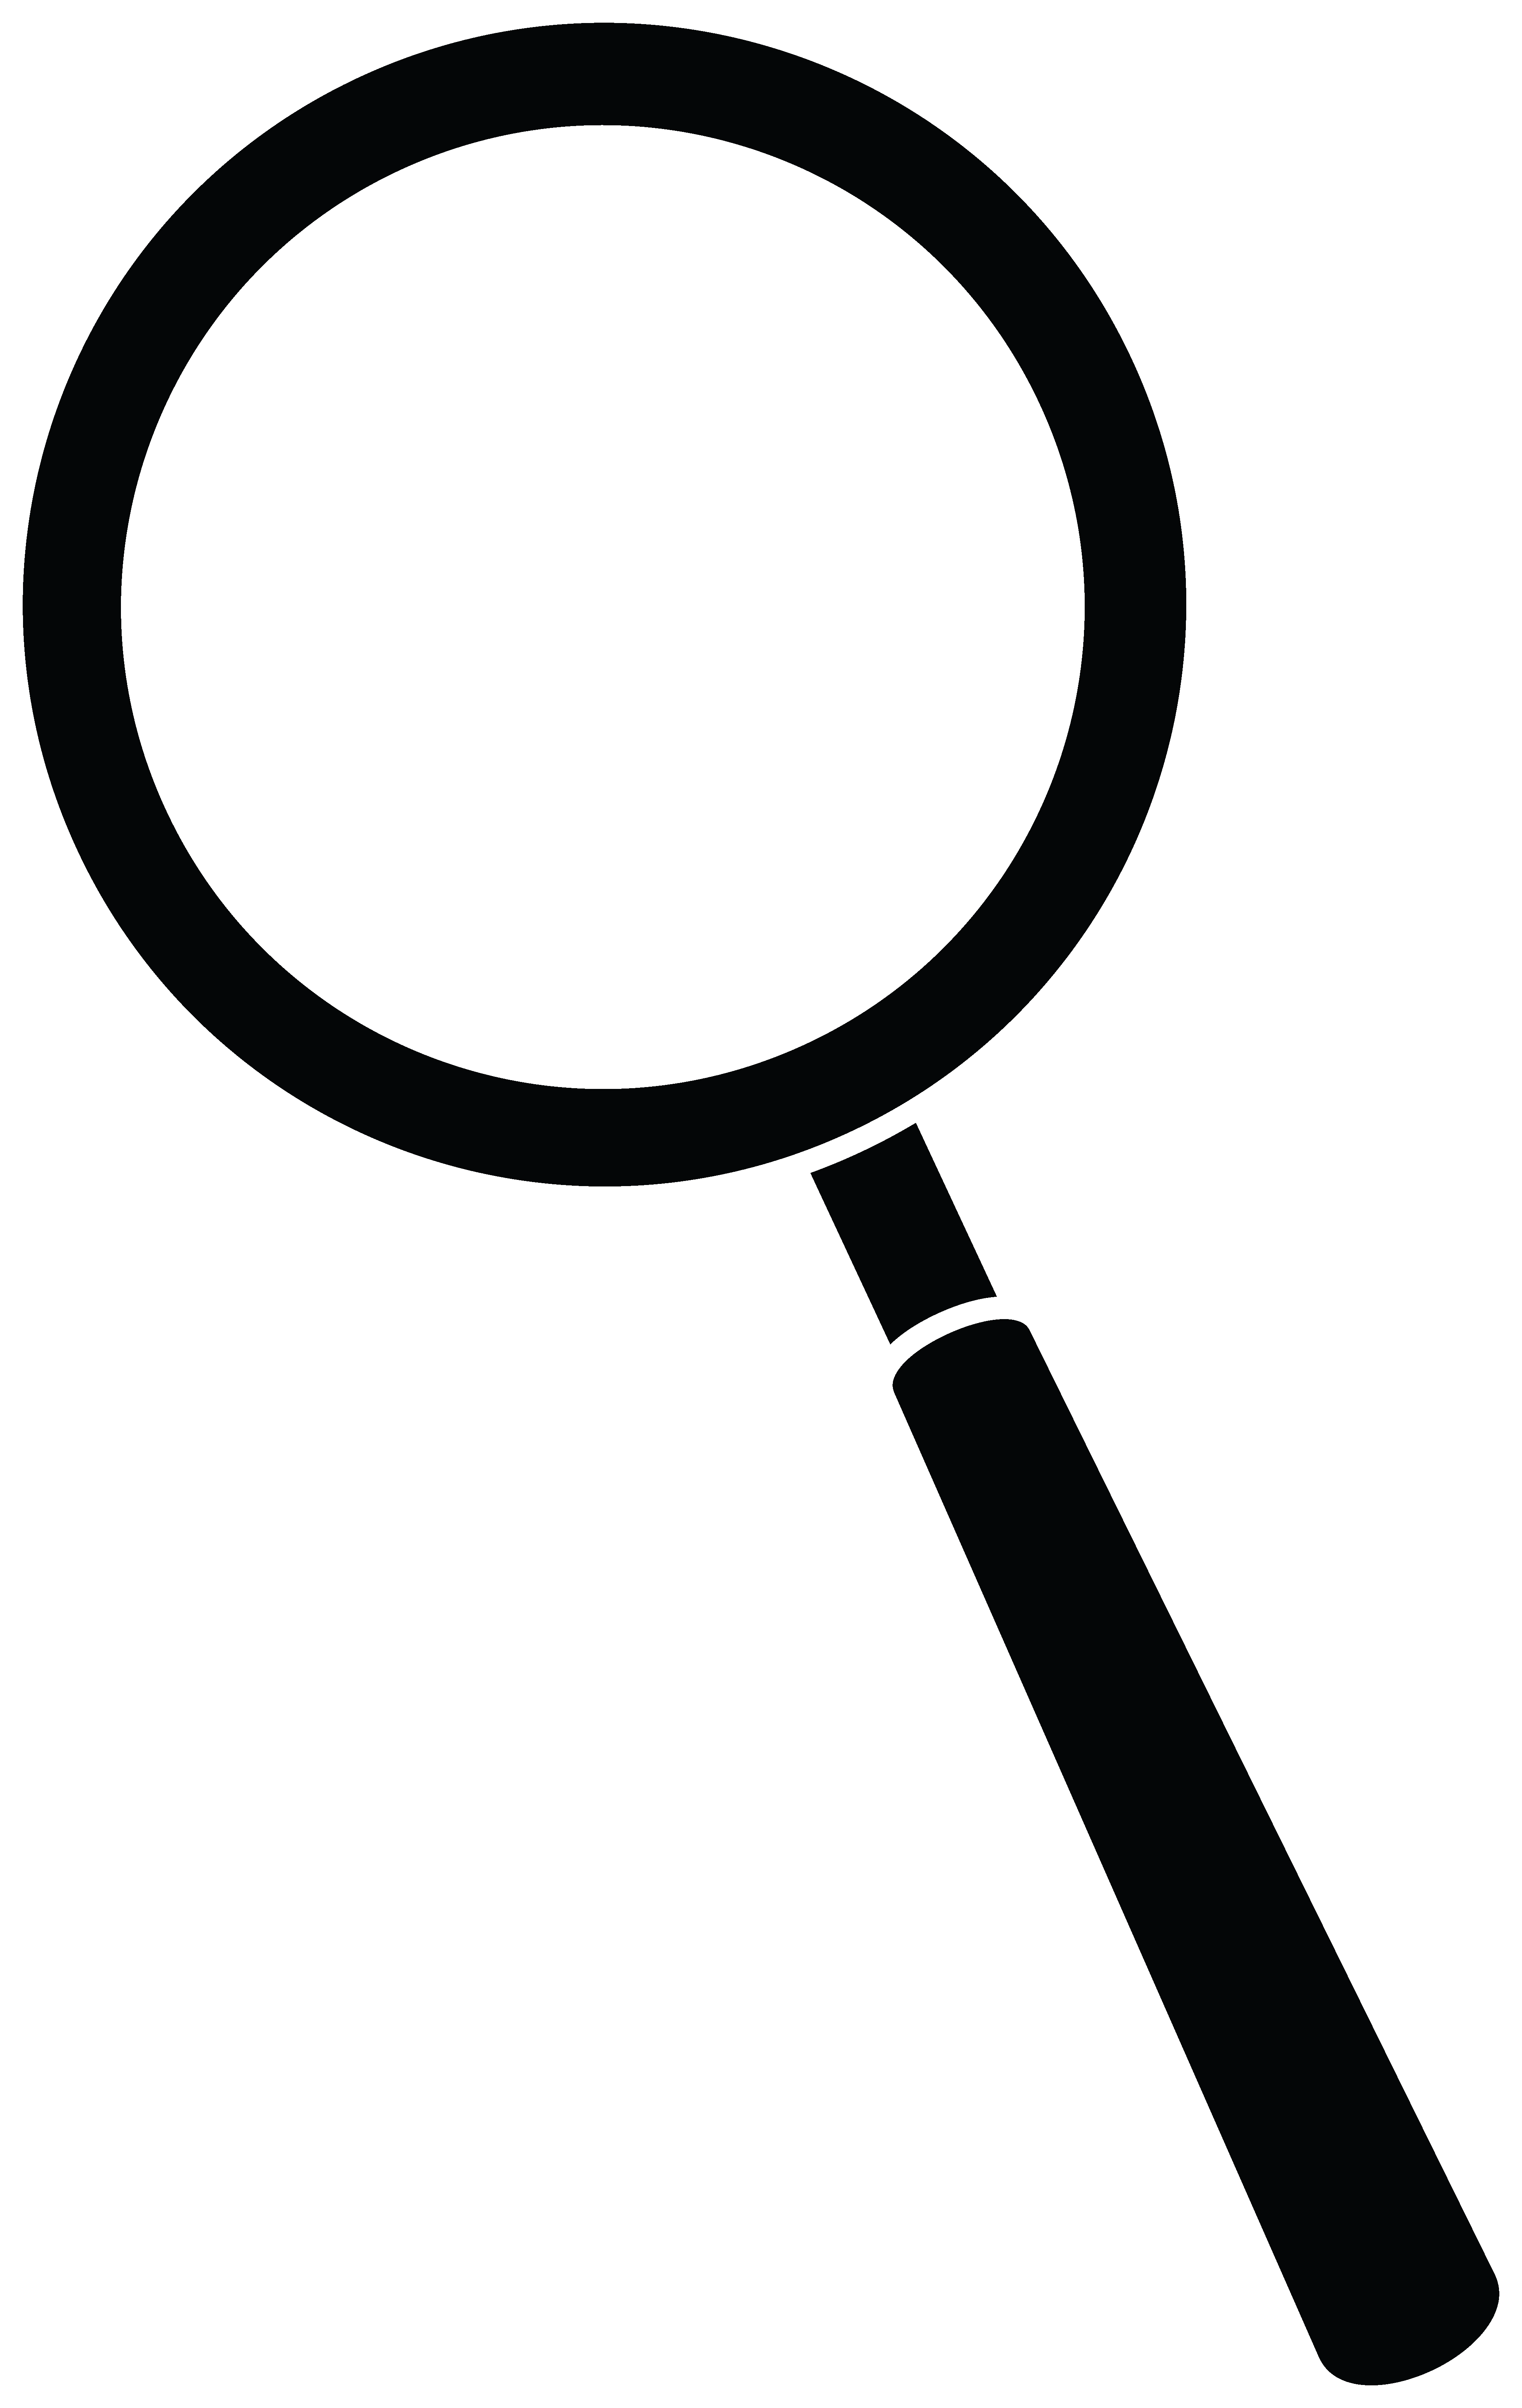 Detective clipart magnifying glass